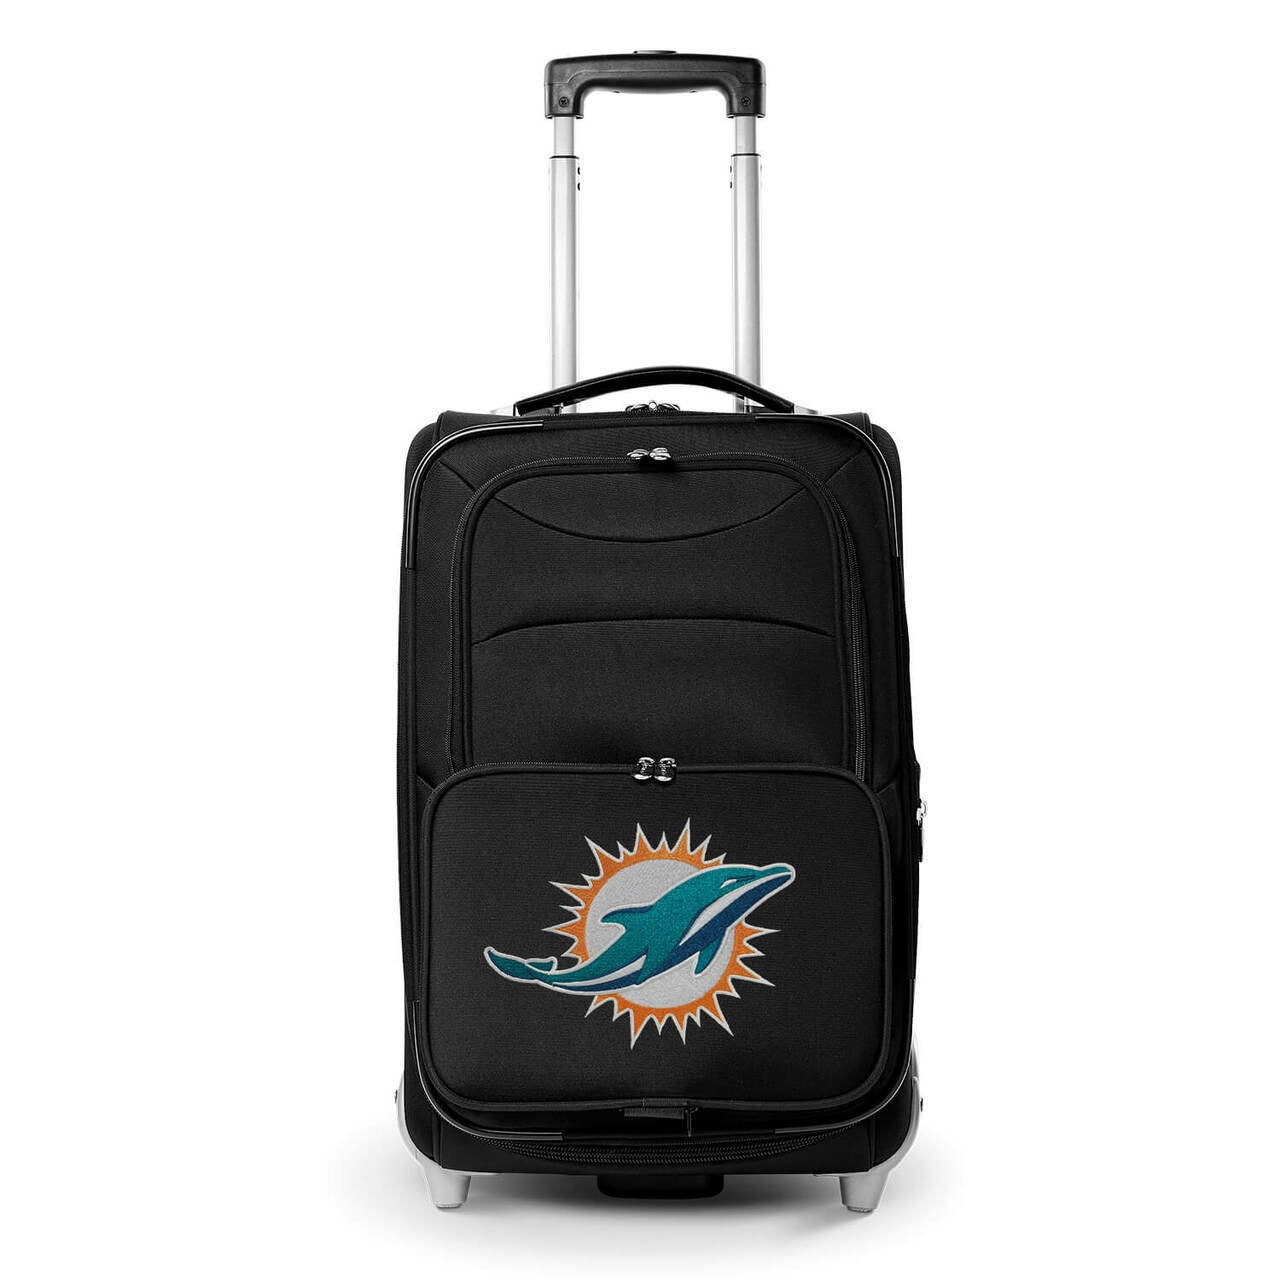 Dolphins Carry On Luggage | Miami Dolphins Rolling Carry On Luggage